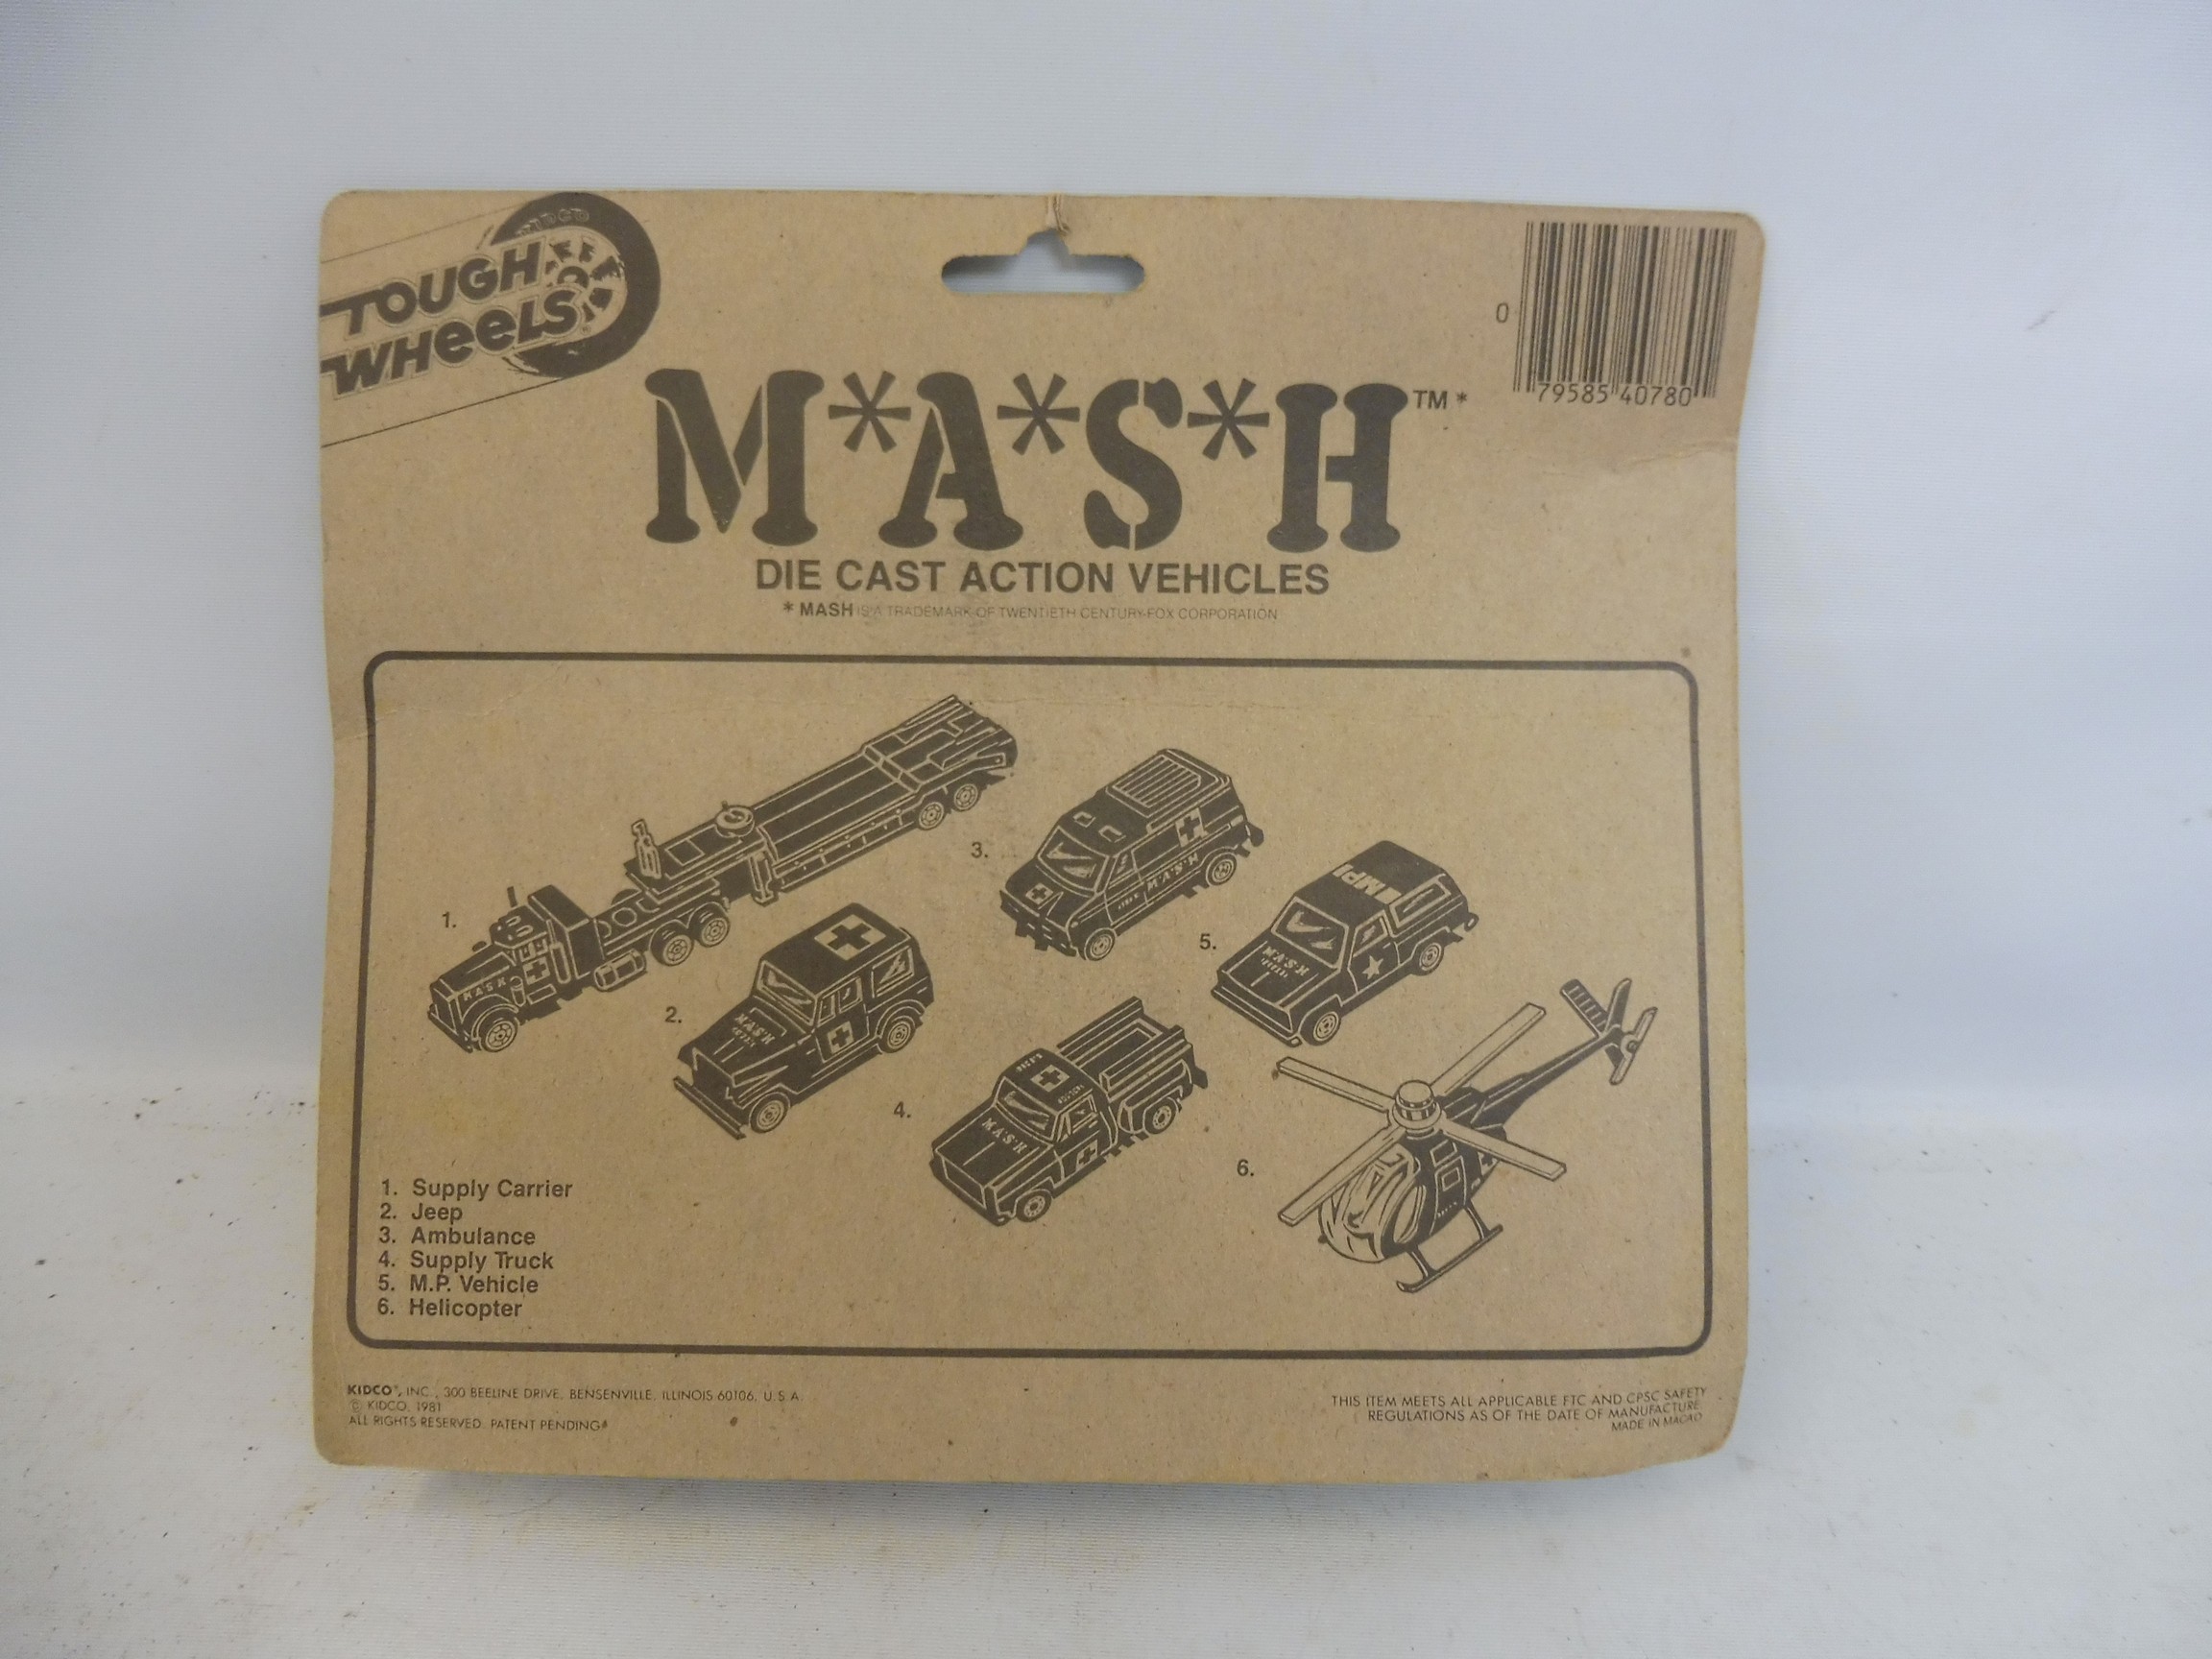 A carded MASH die-cast gift set, made by Rough Wheels. - Image 4 of 4